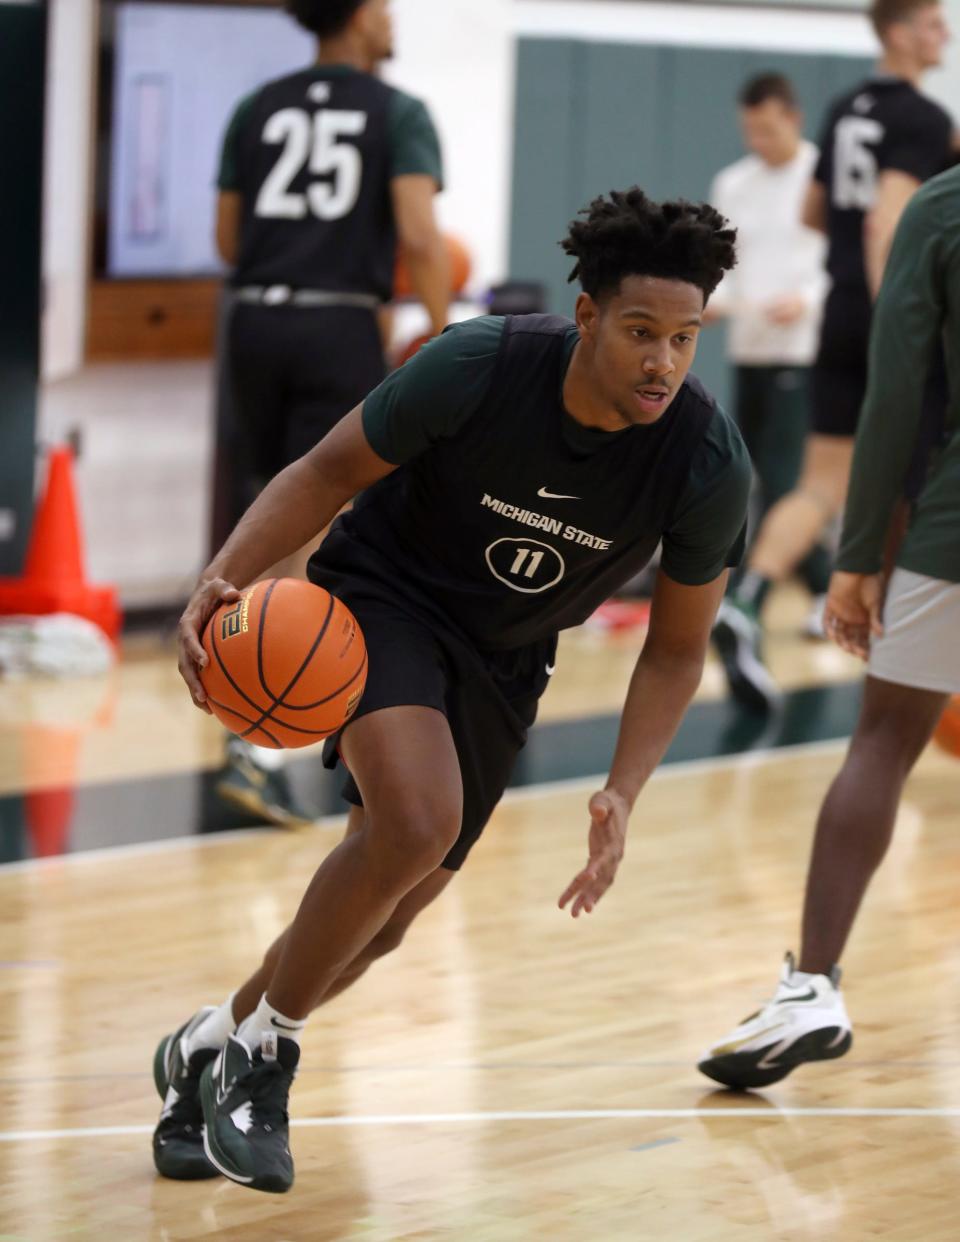 Michigan State guard A.J. Hoggard goes through drills during practice on Thursday, Oct. 20, 2022 at the Breslin Center.